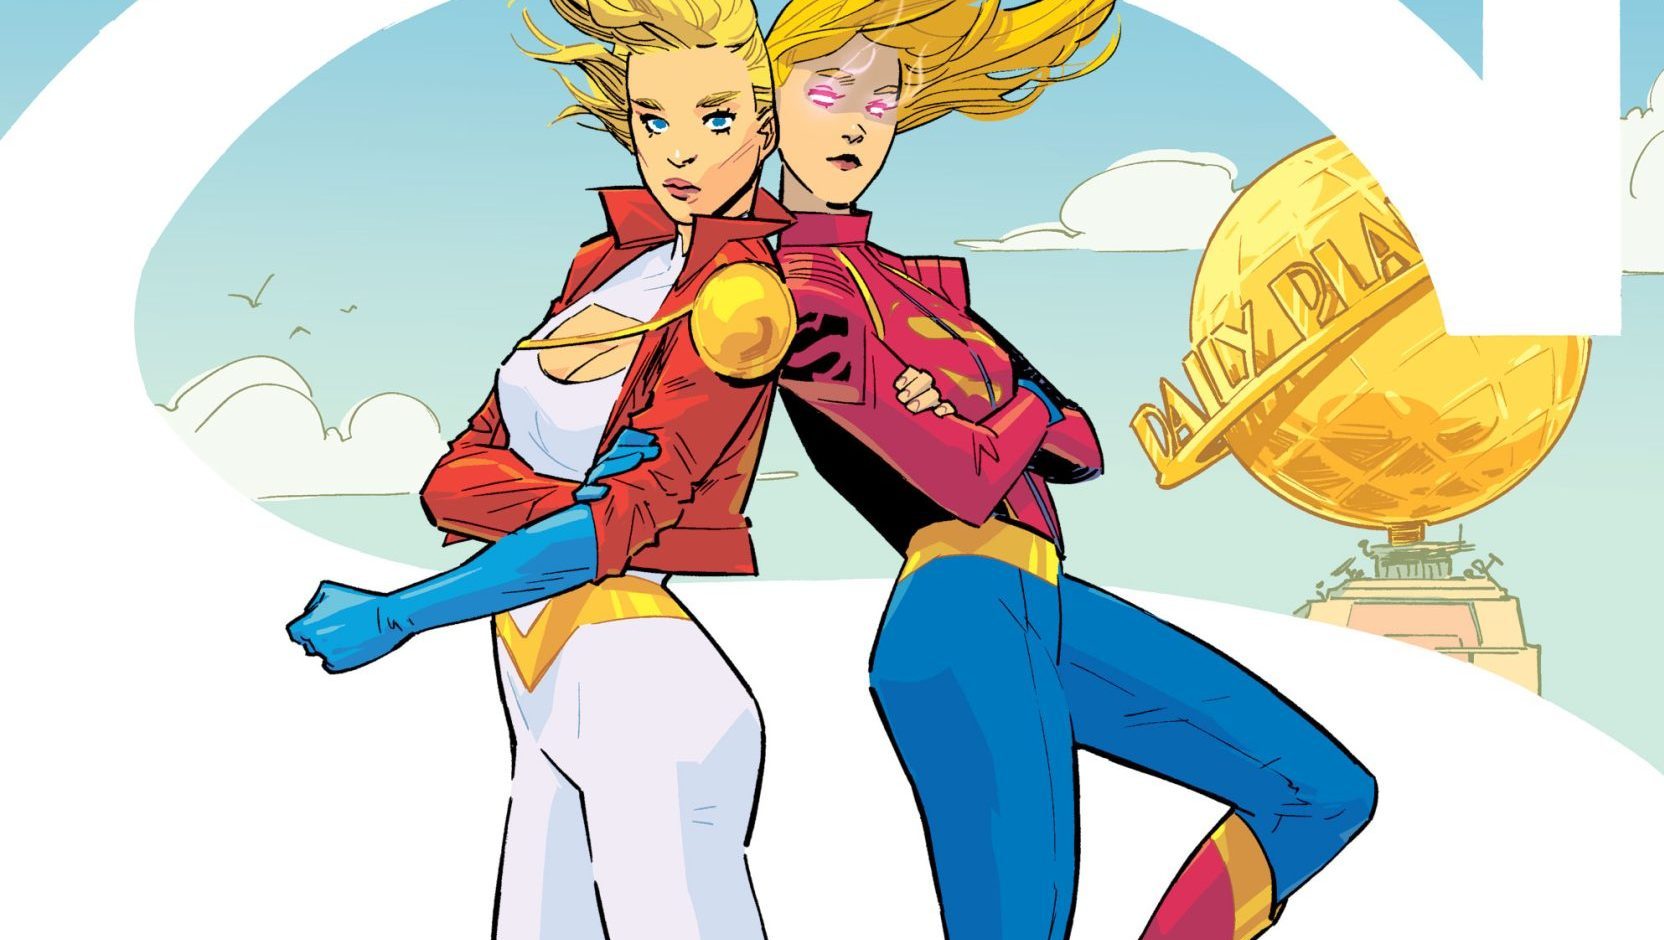 ‘Power Girl’ #6 mixes The Wizard of Oz with 21 Jump Street